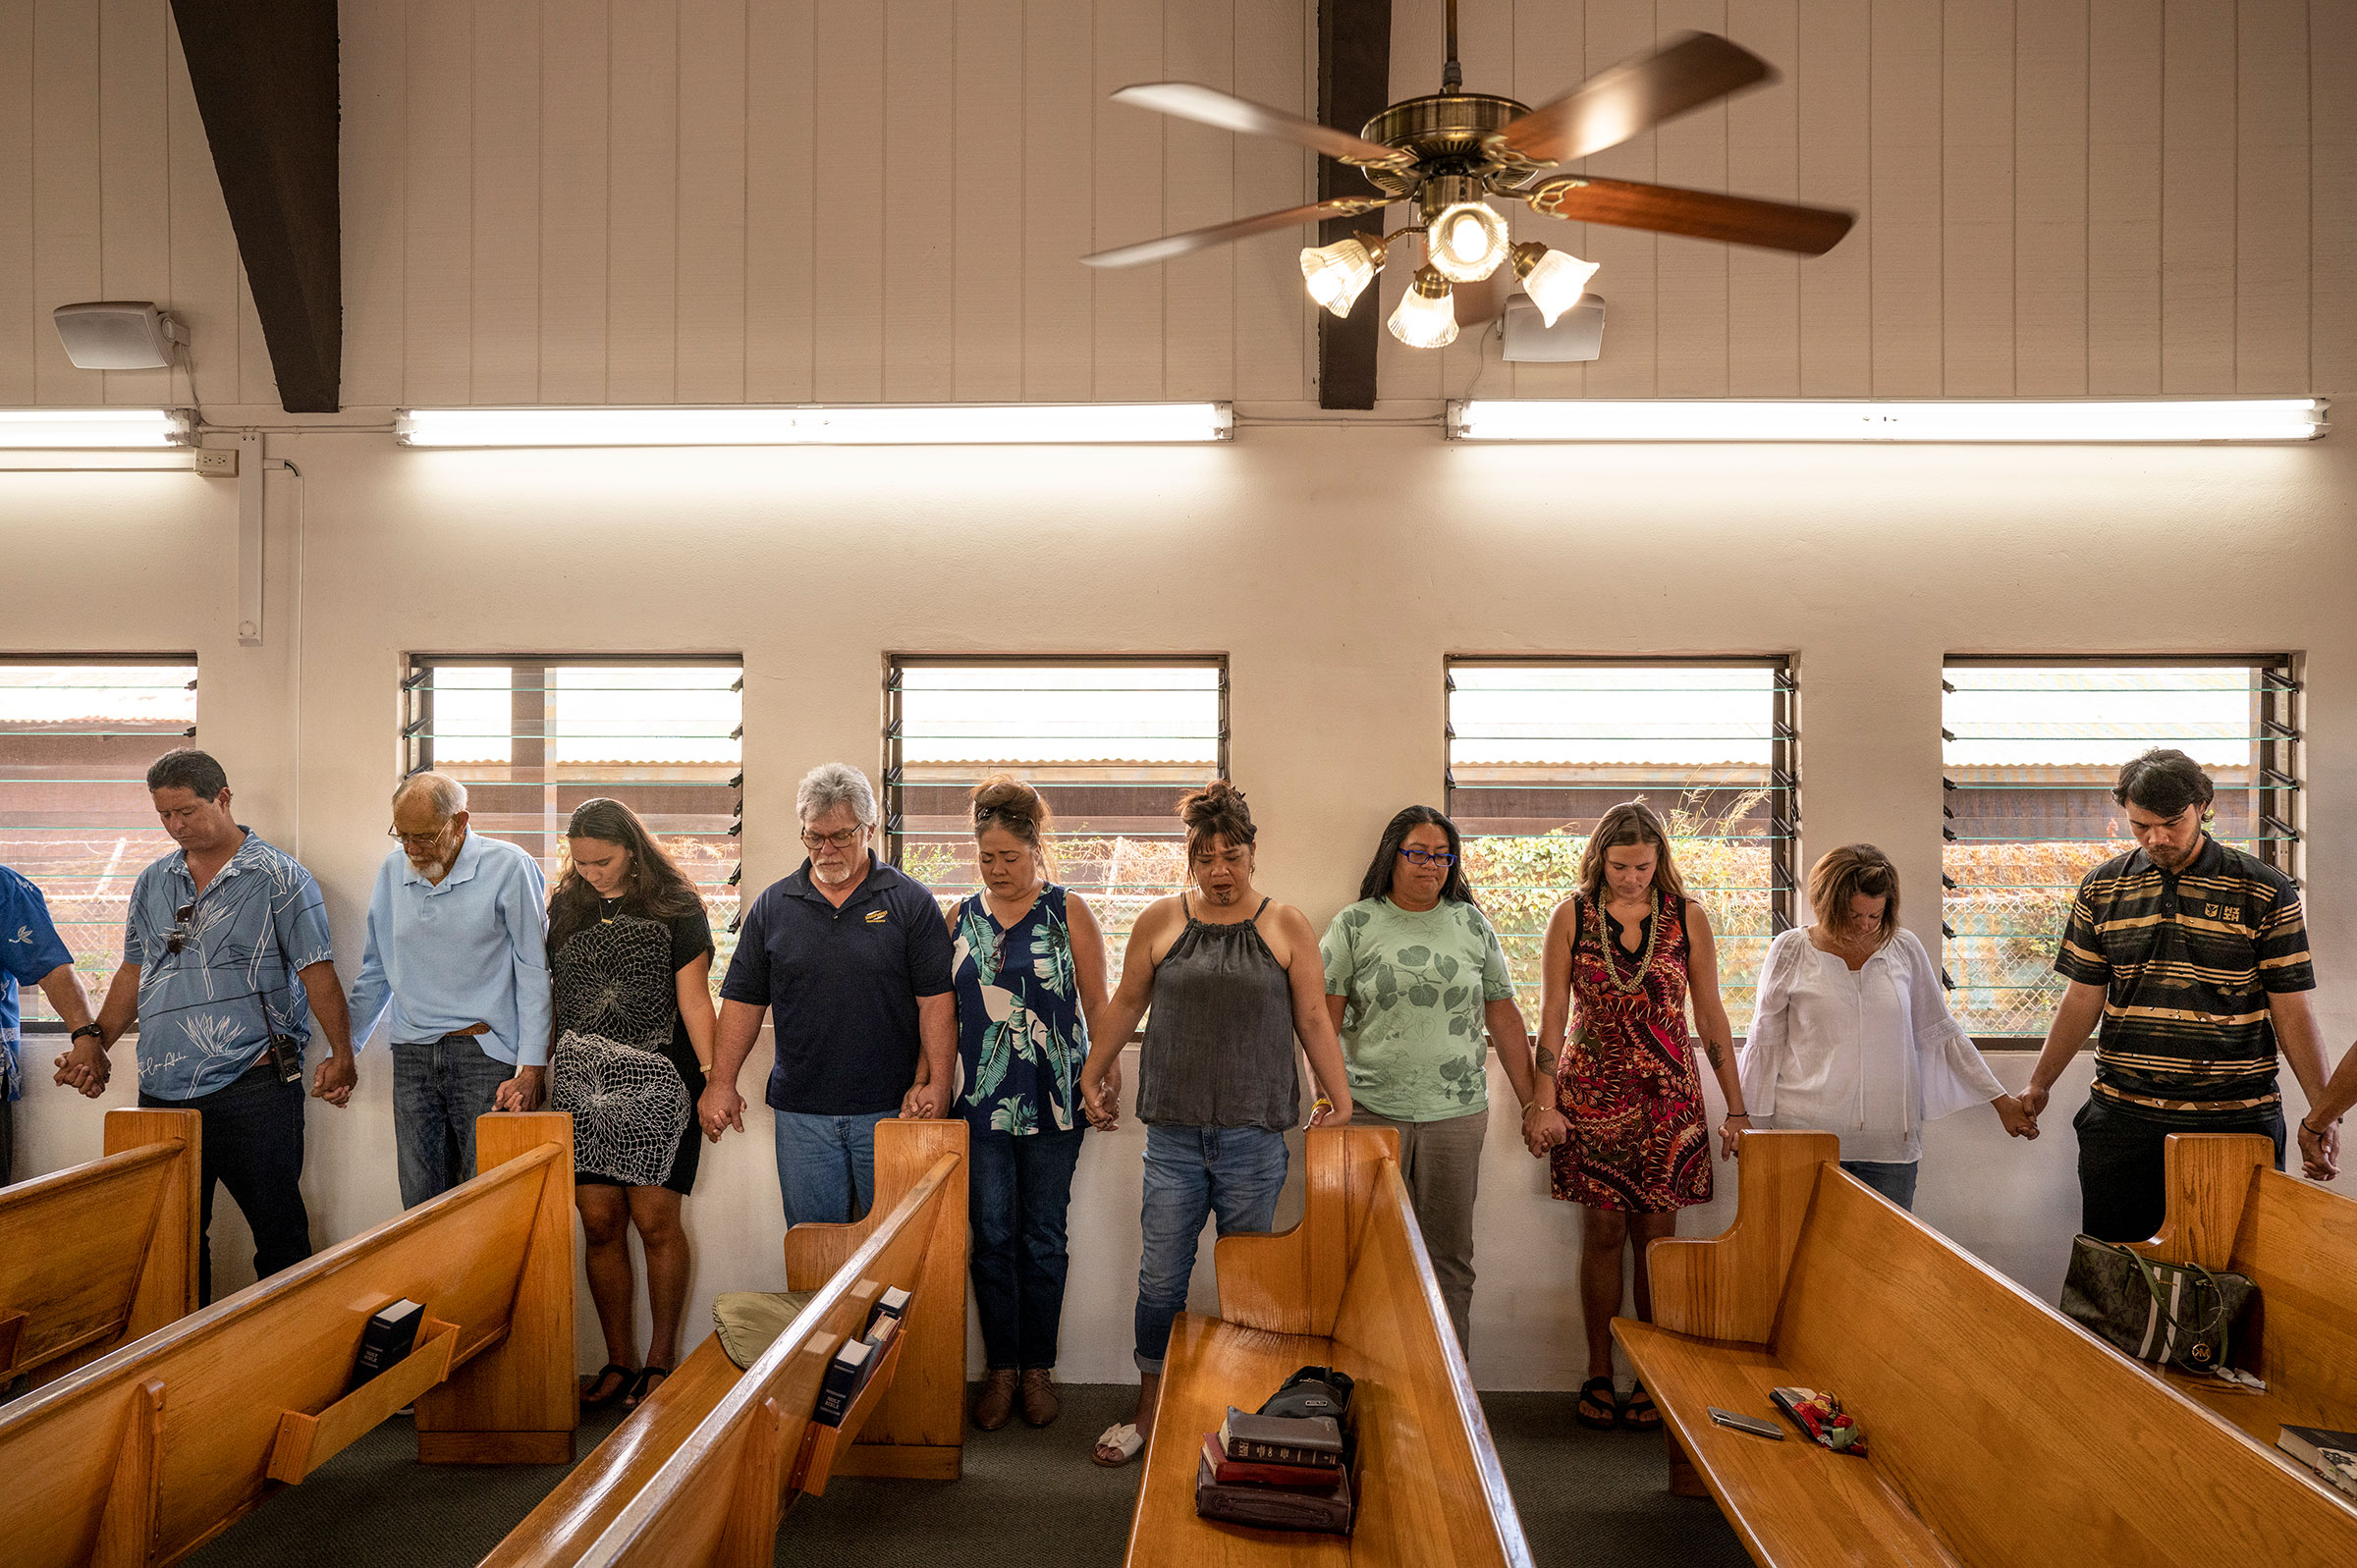 At the first Sunday service since the deadly fires last week, parishioners of the Kupaianaha church pray for healing after the tragedy, in Wailuku on Aug. 13. (David Butow for TIME)